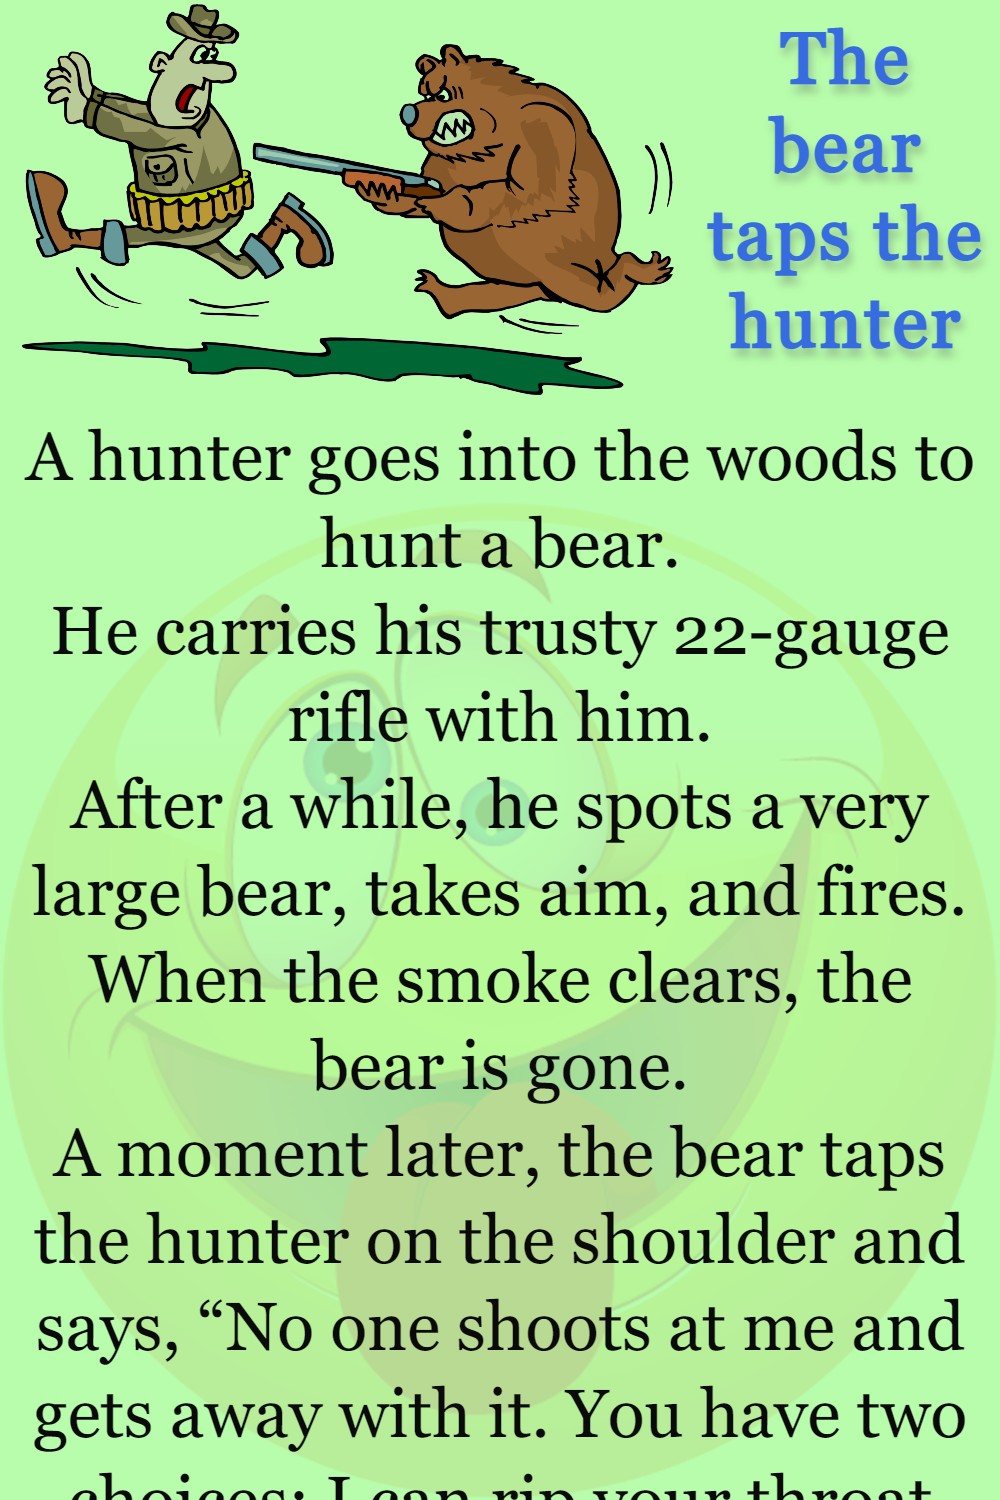 The bear taps the hunter